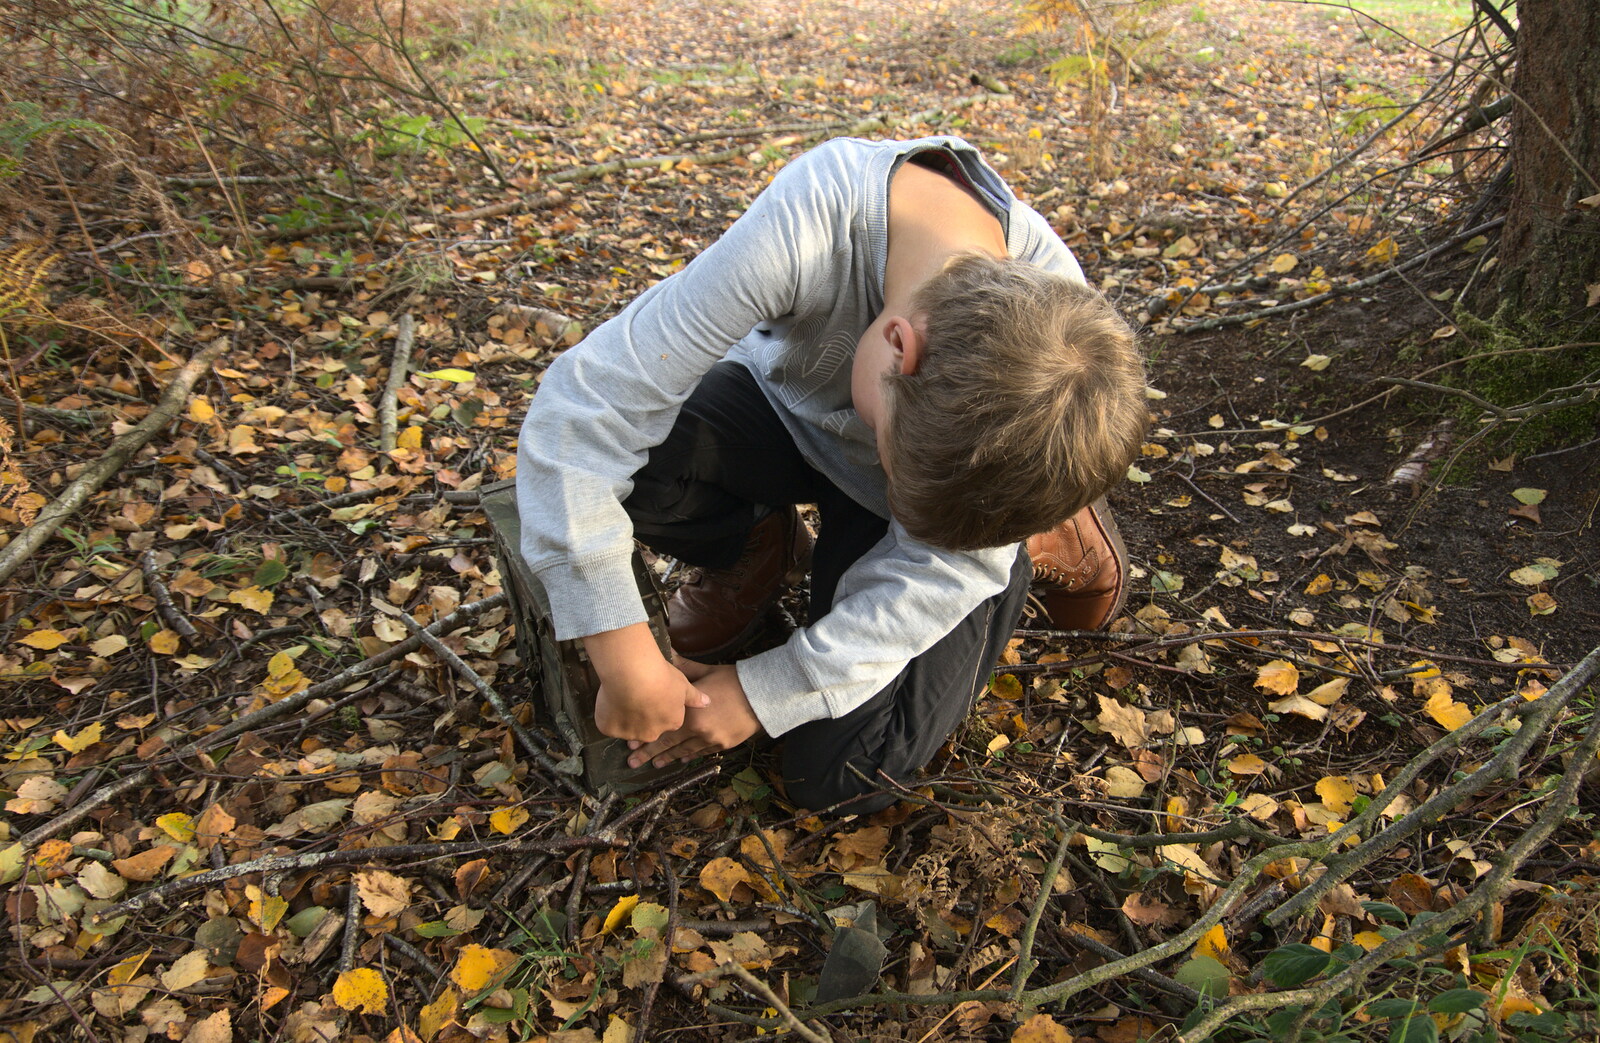 Fred opens the old ammo box from Evidence of Autumn: Geocaching on Knettishall Heath, Suffolk - 7th October 2018